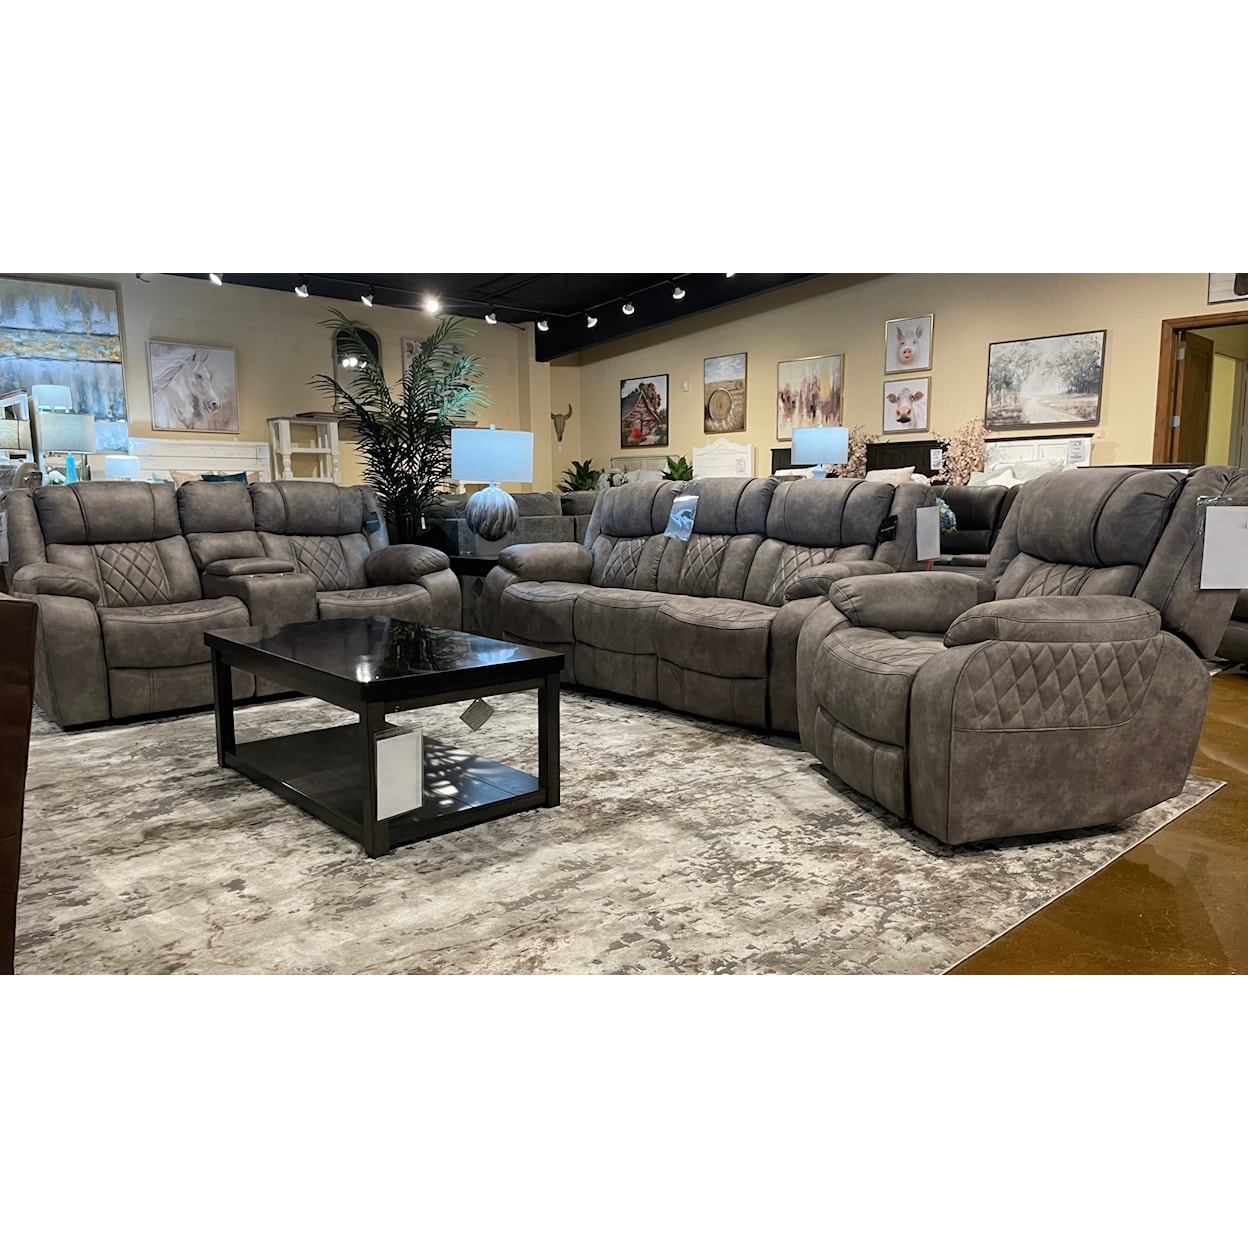 Standard Furniture Luxor Pewter Sofa and Loveseat